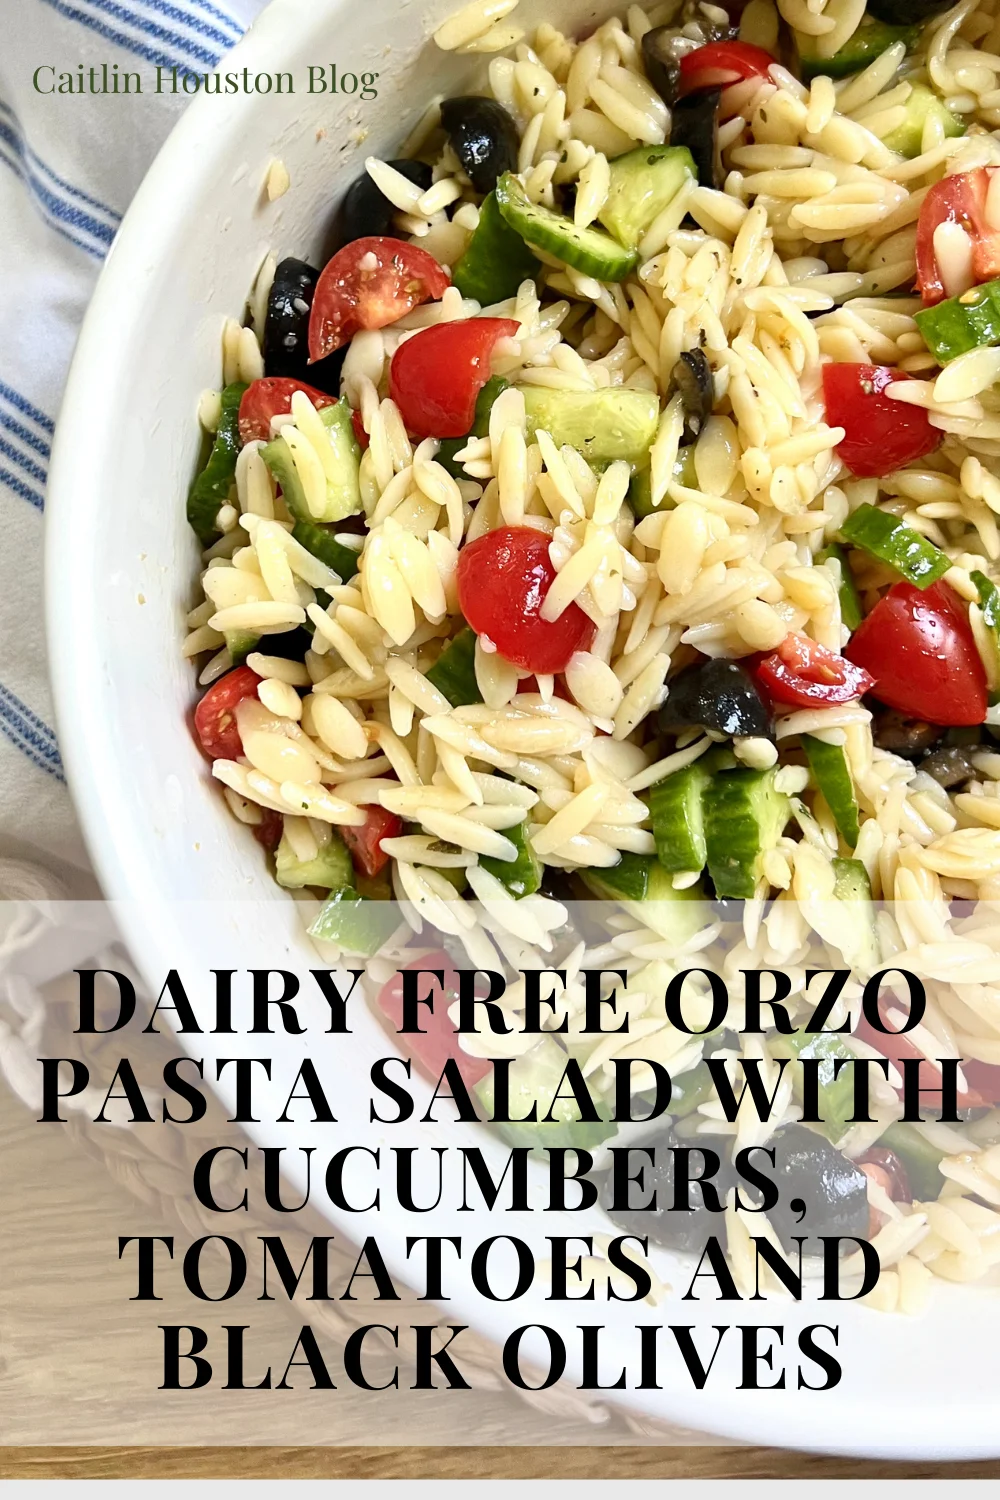 Orzo Pasta Salad with Cucumbers Tomatoes Black Olives